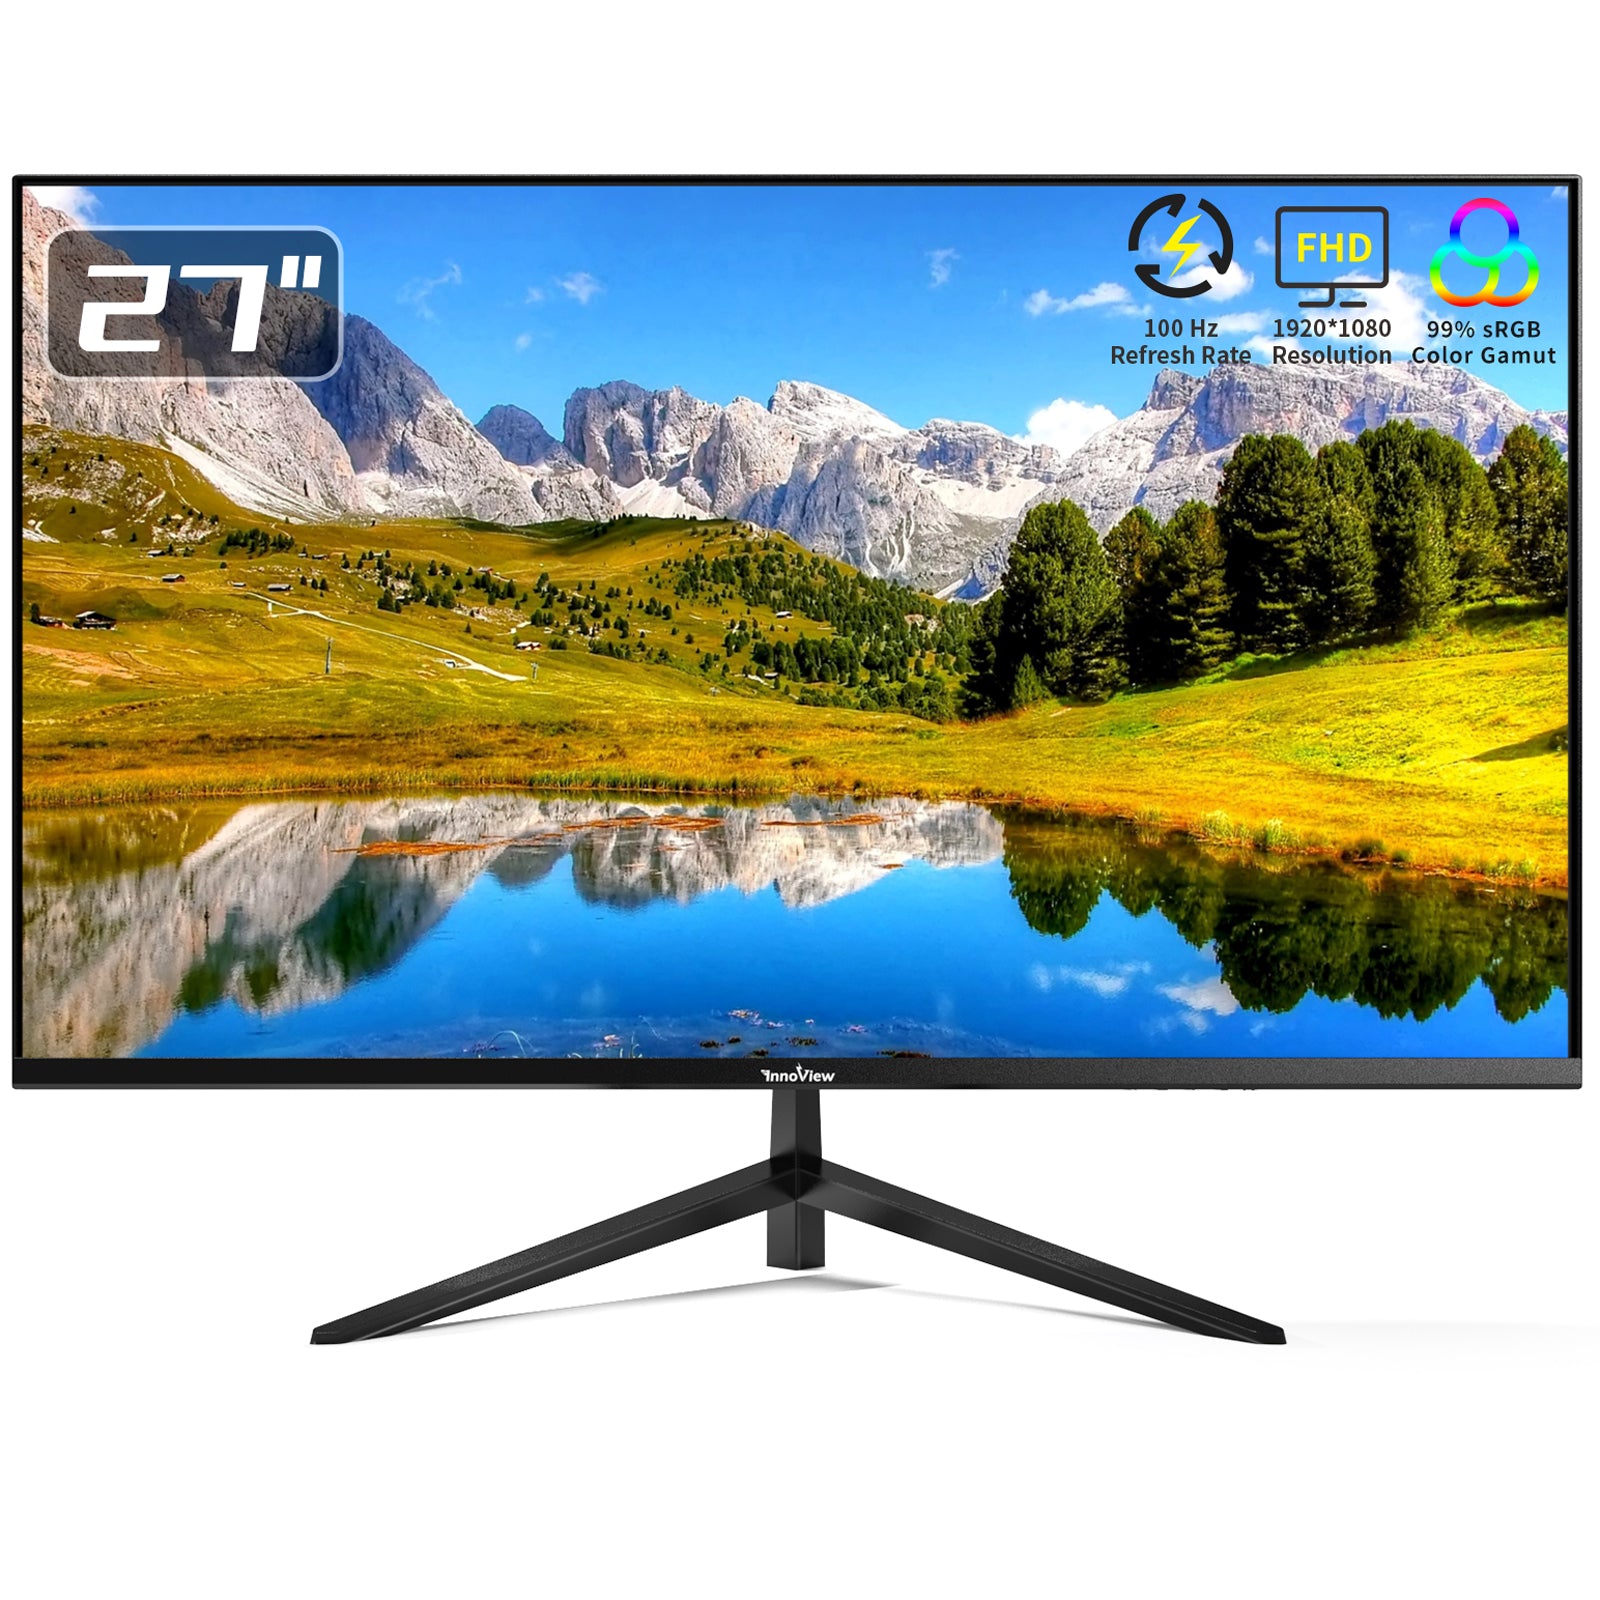 InnoView 27-inch FHD 100HZ 4000:1 Contrast Ratio Monitor – InnoView Monitor